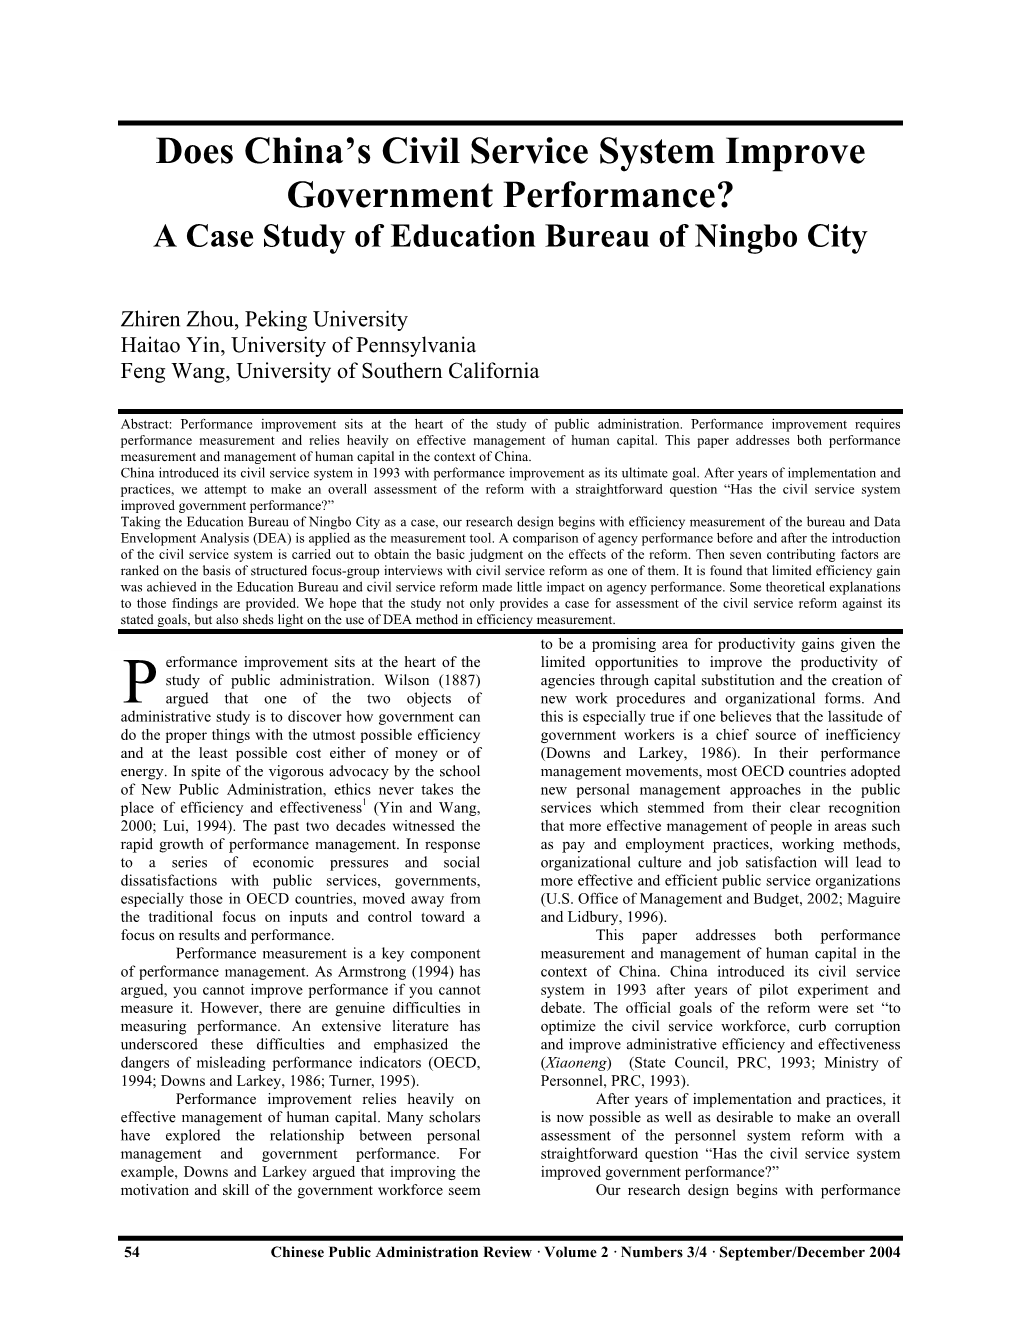 Does China's Civil Service System Improve Government Performance?